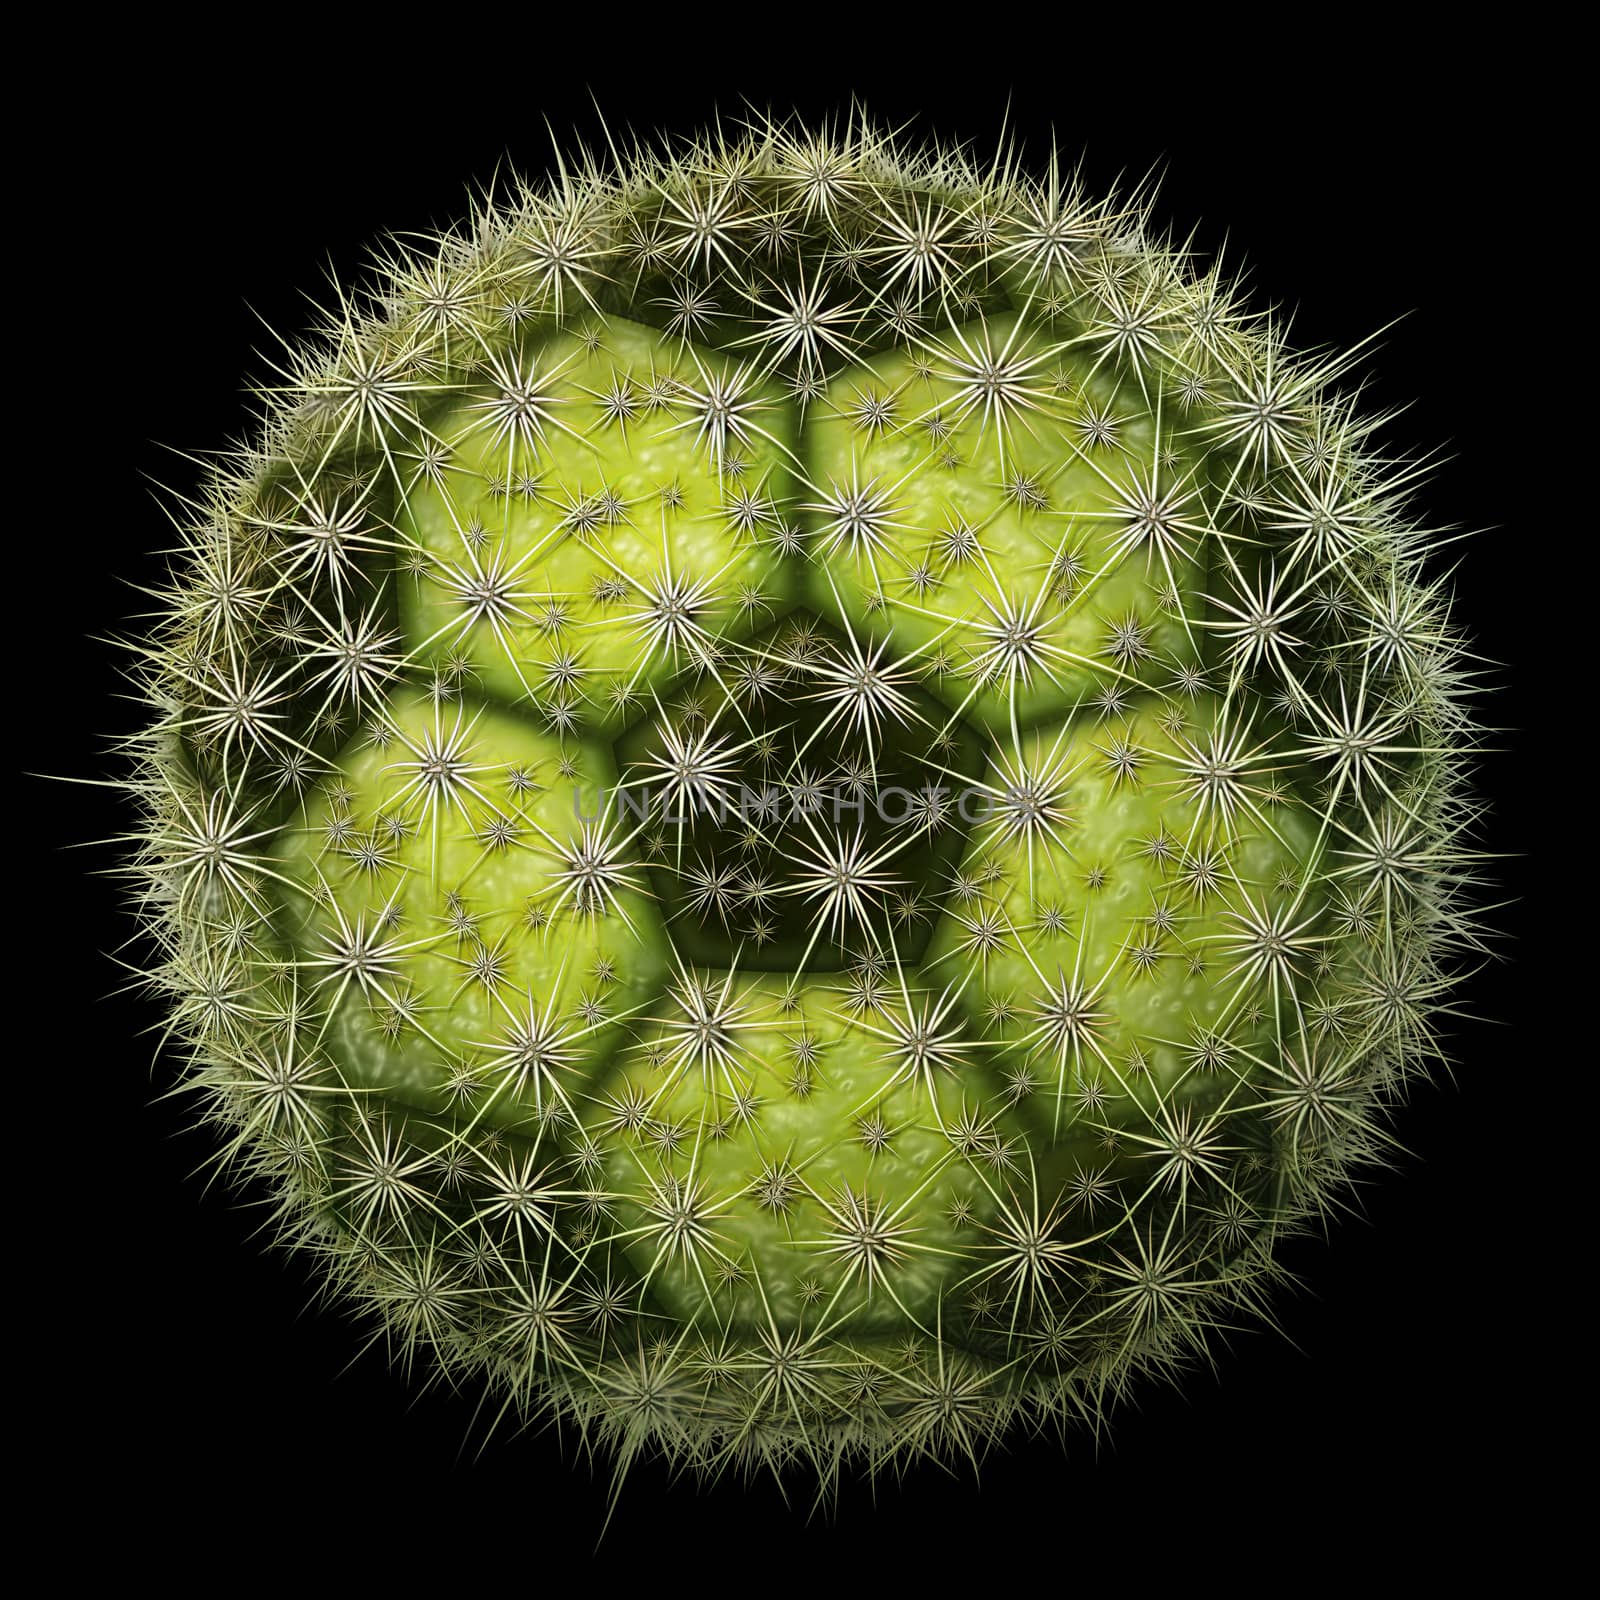 Digital illustration of a soccer ball with a cactus texture.